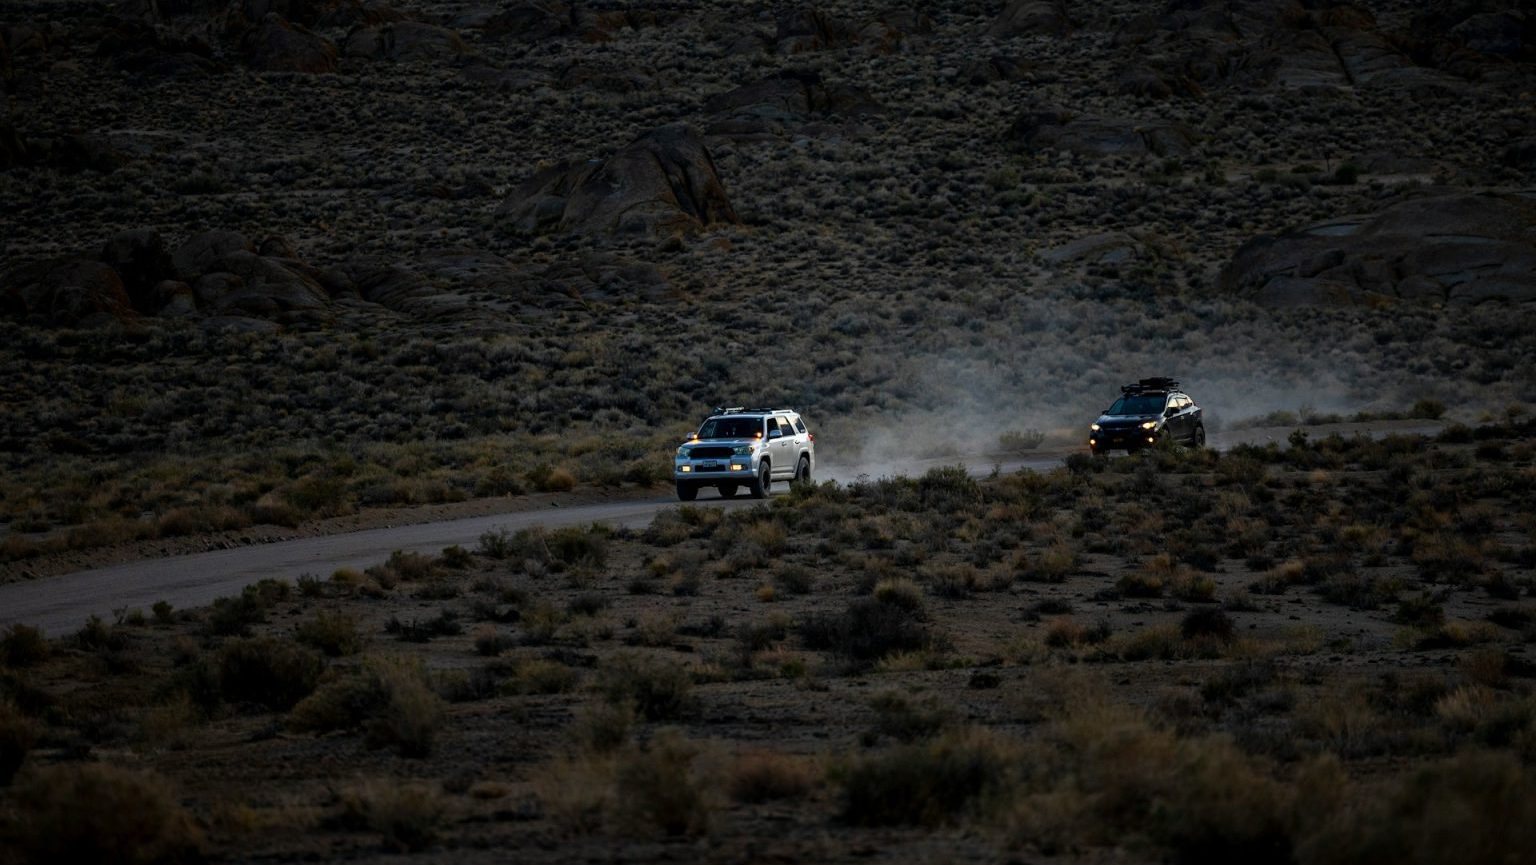 Two electric vehicles driving on a dusty road amidst desert terrain at dusk.